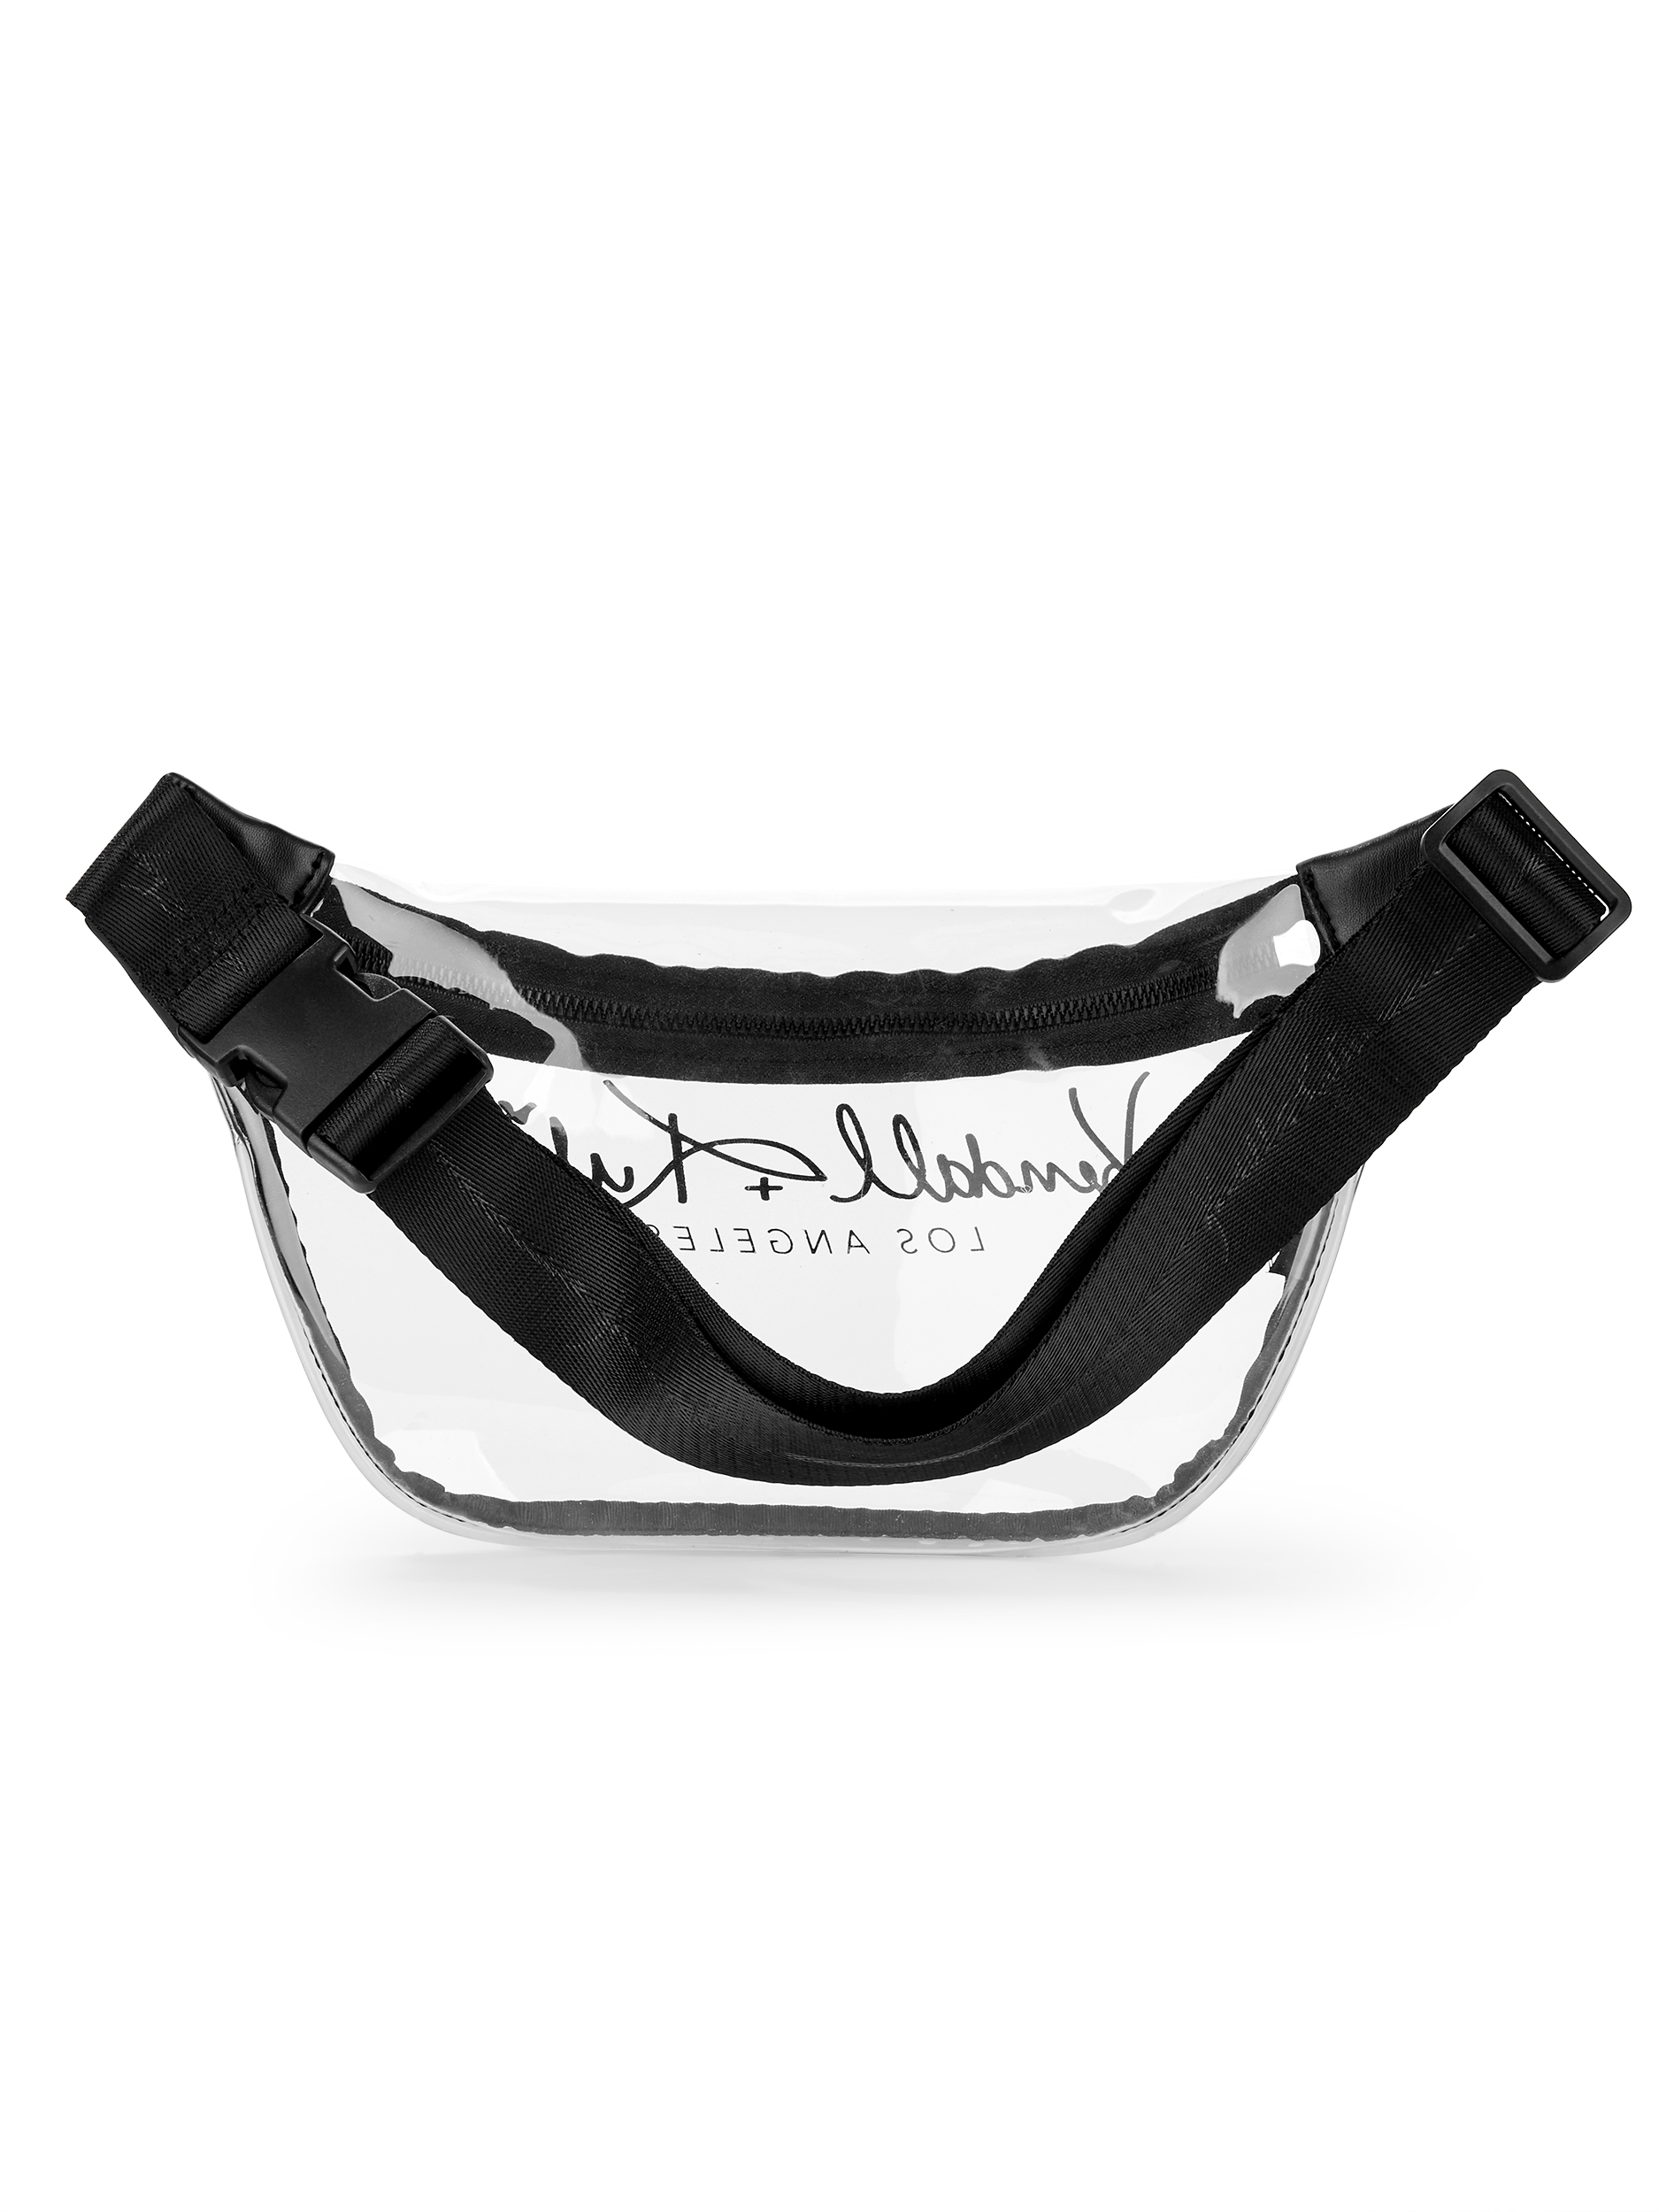 Kendall + Kylie for Walmart Clear Lucite Large Fanny Pack - image 4 of 5